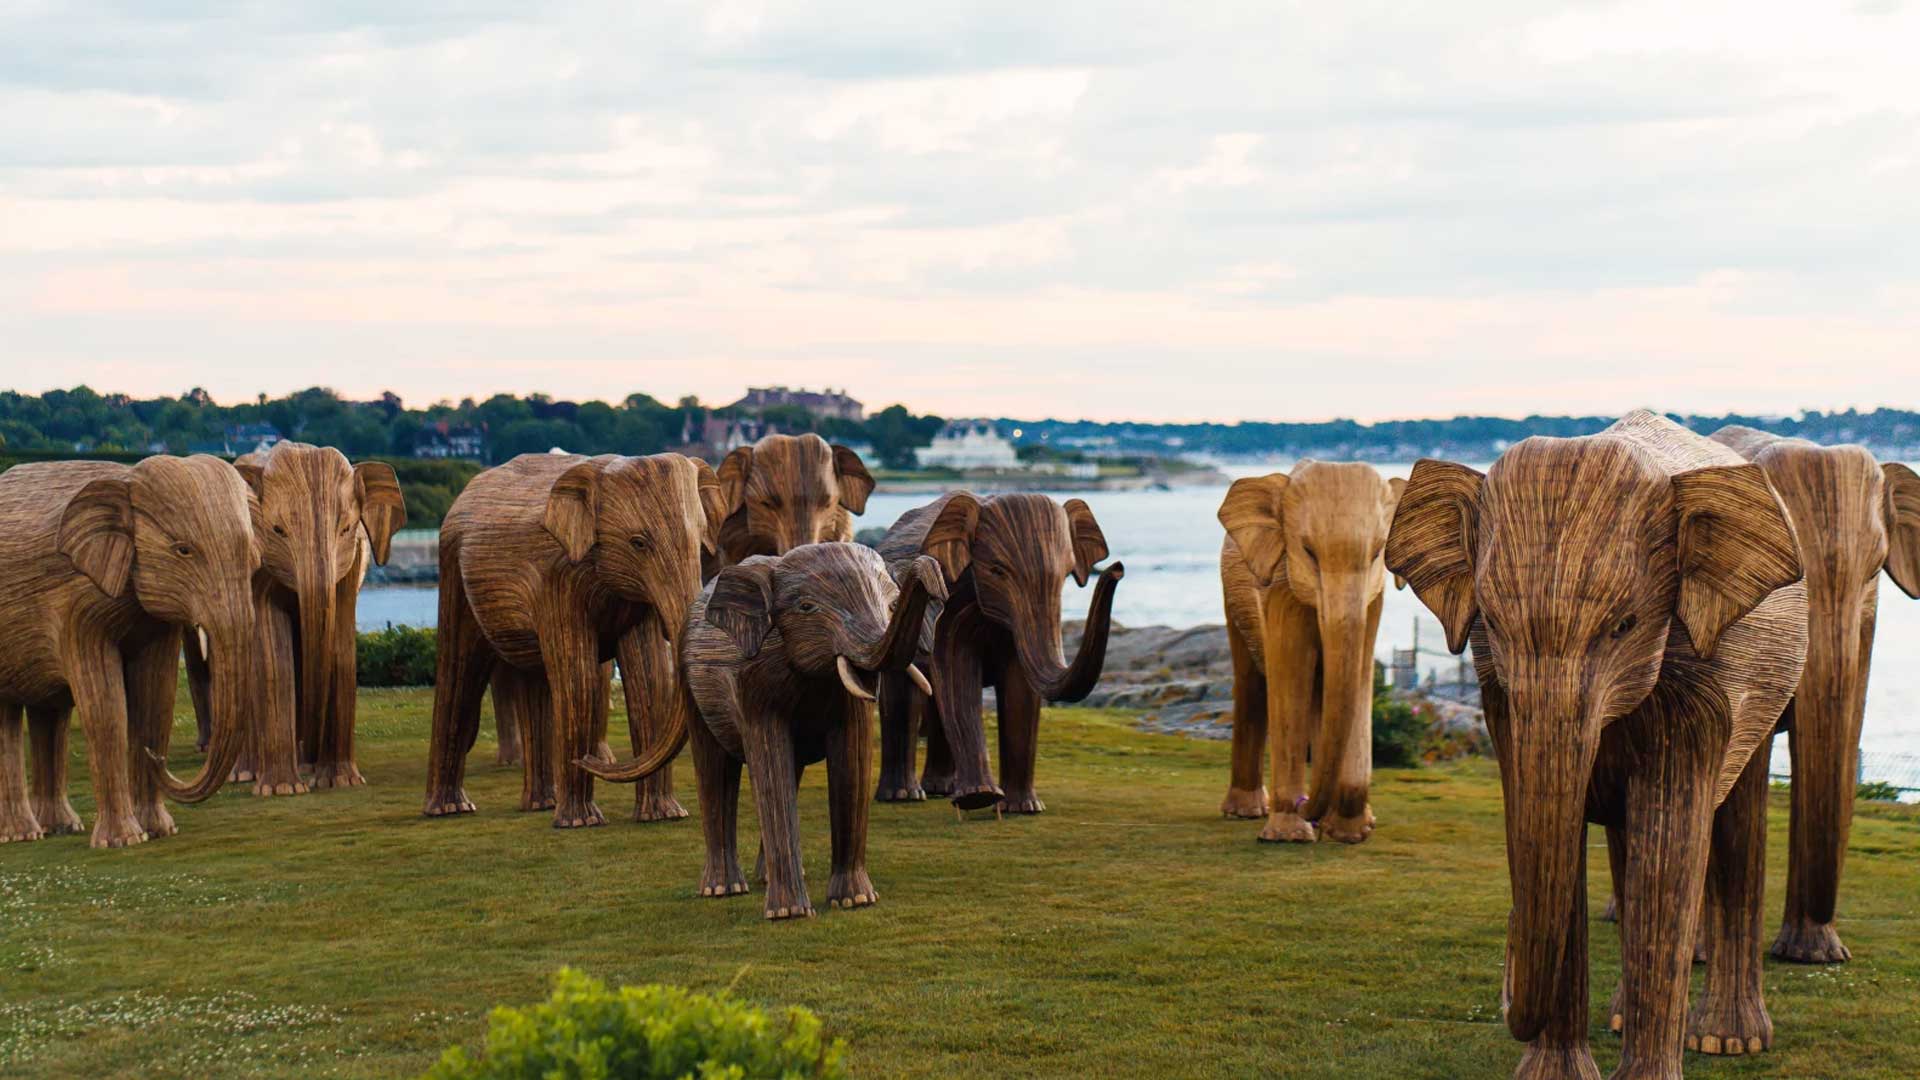 June 24, 2024: 100 life-size elephant sculptures made by artisans in Tamil Nadu, India, arrive in Newport, R.I., via the Port of New York — the first stop on a year-long, cross-country journey. The elephants on display in Newport, R.I.